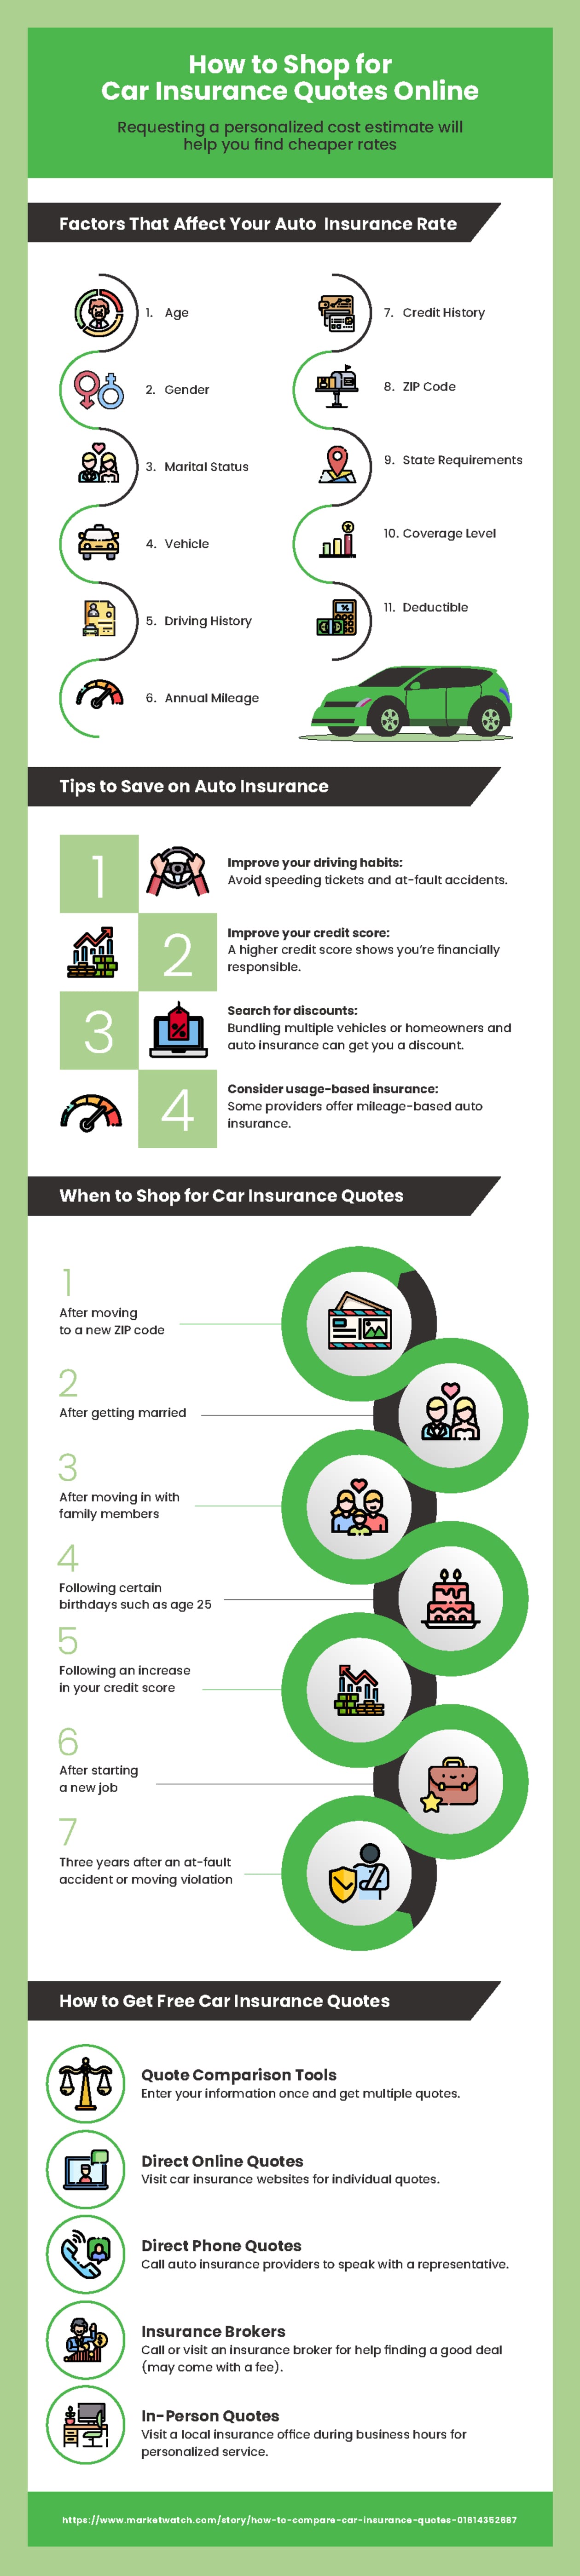 How to Shop for Car Insurance Quotes Online